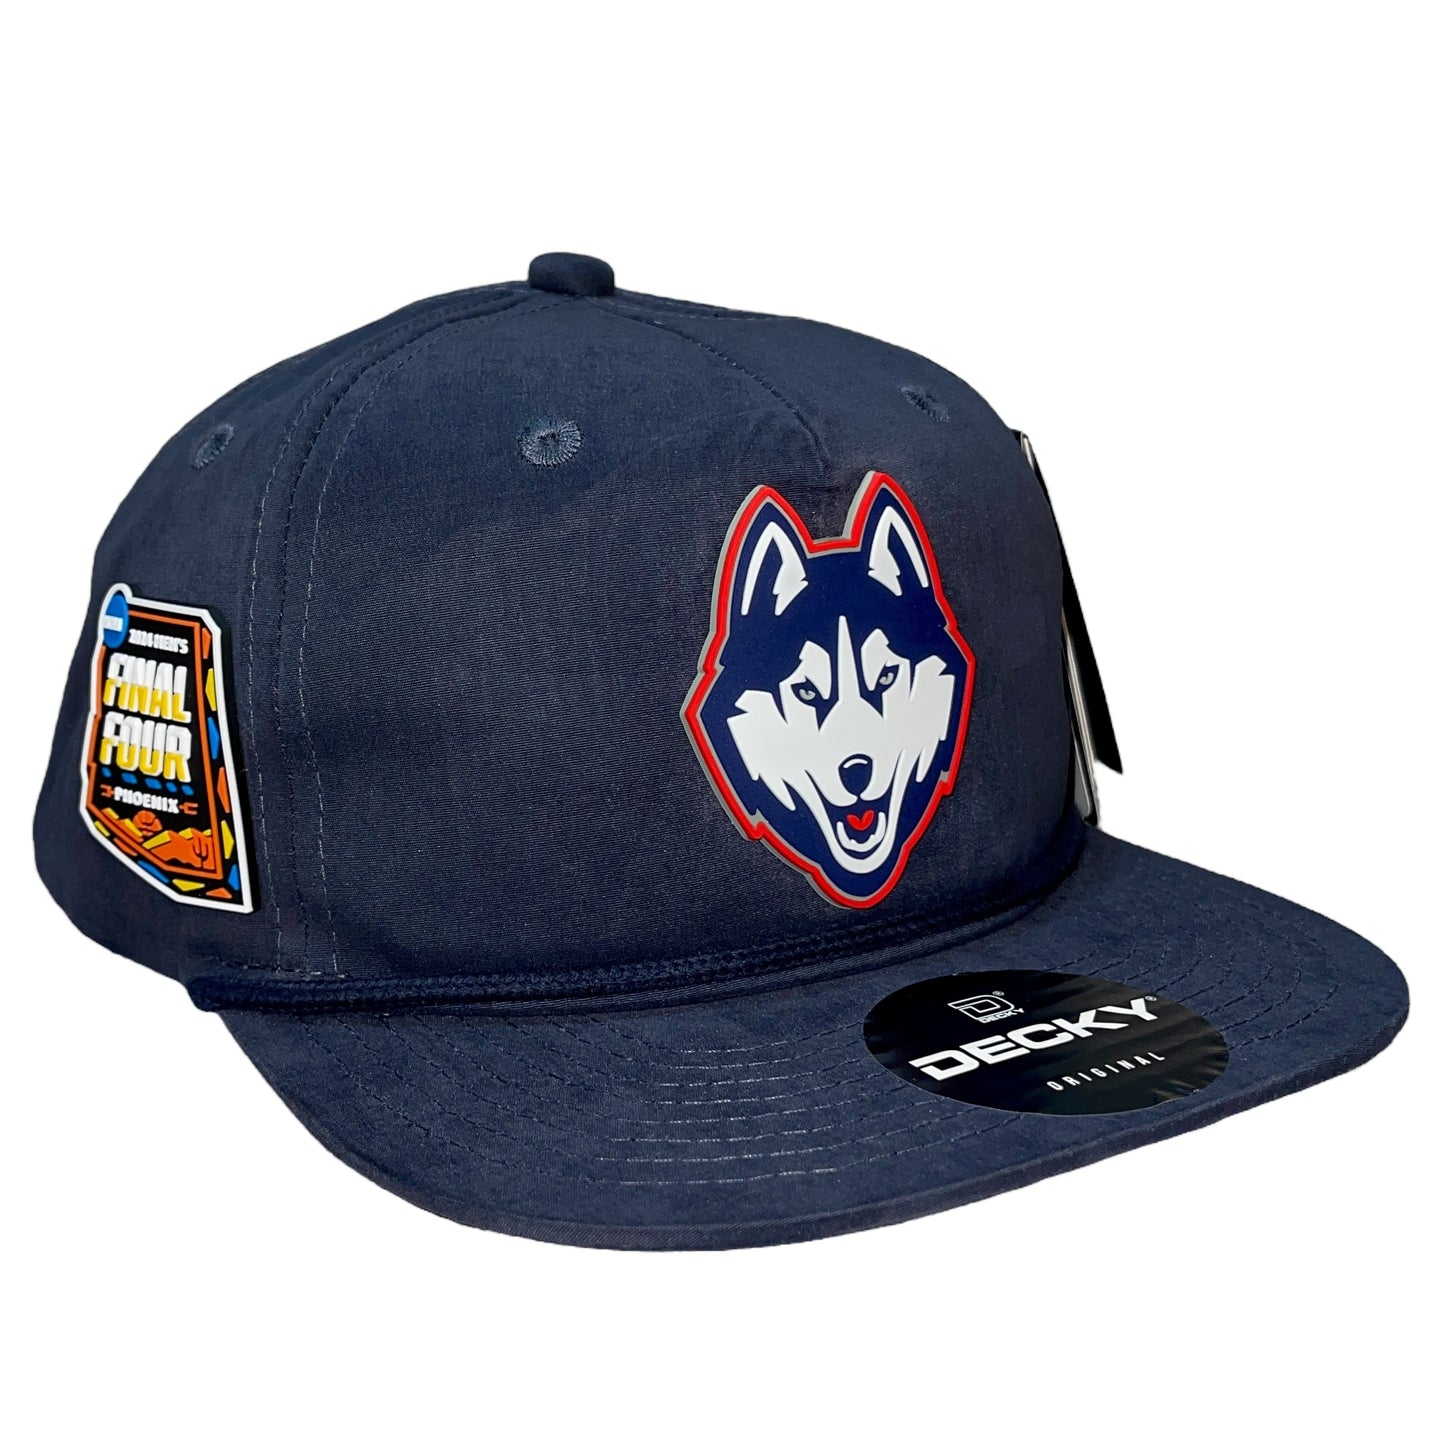 UConn Huskies 2024 Final Four 3D Classic Rope Hat- Navy